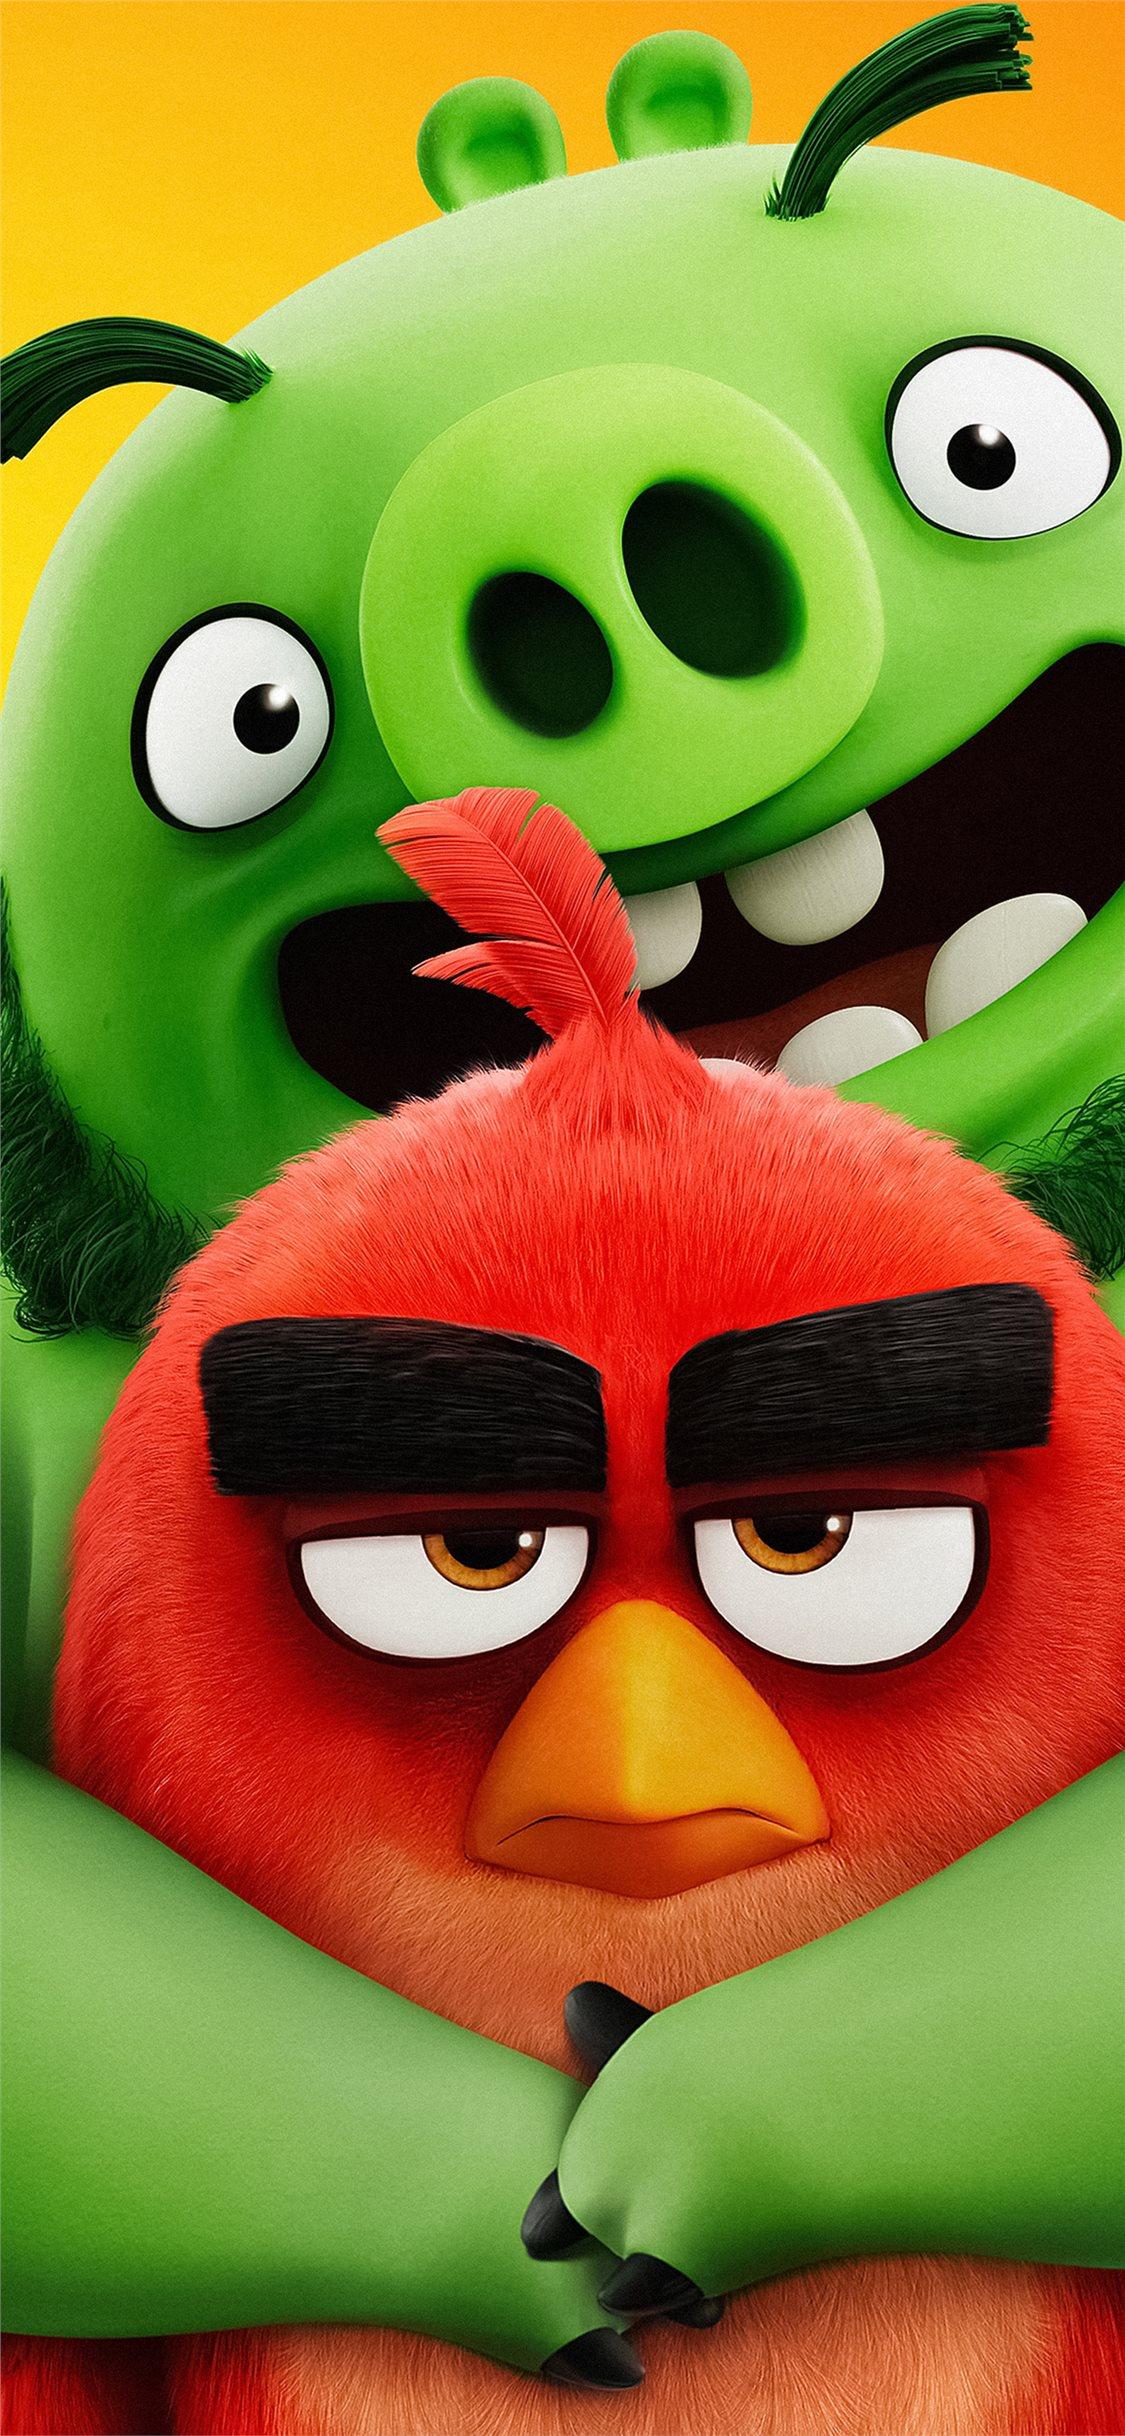 the angry birds movie 2 2019 5k new iPhone X Wallpaper Free